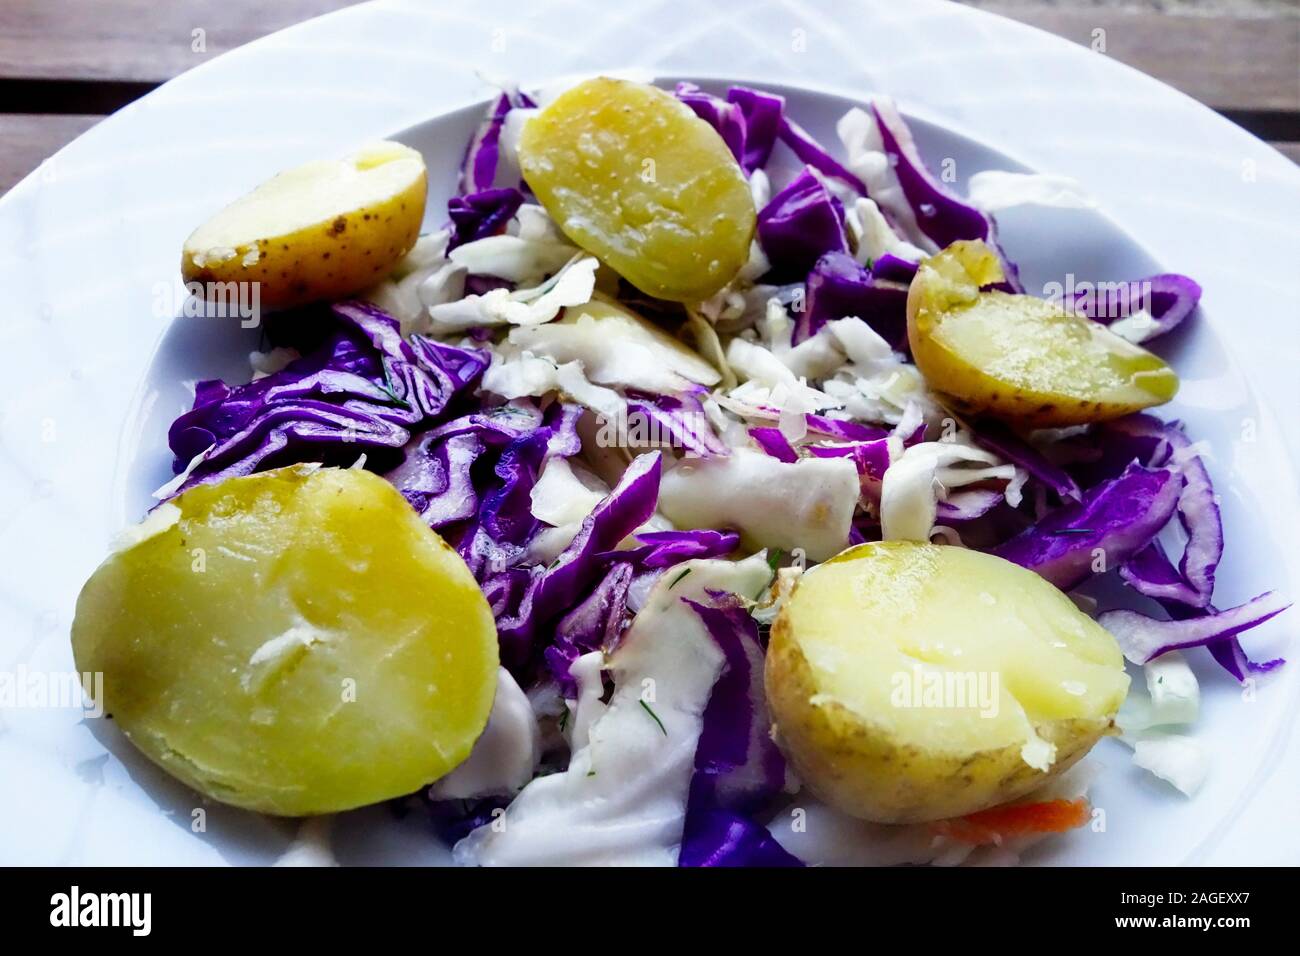 Roasted Potato and Chopped Mixed Vegetable Salad with Olive Oil Stock Photo